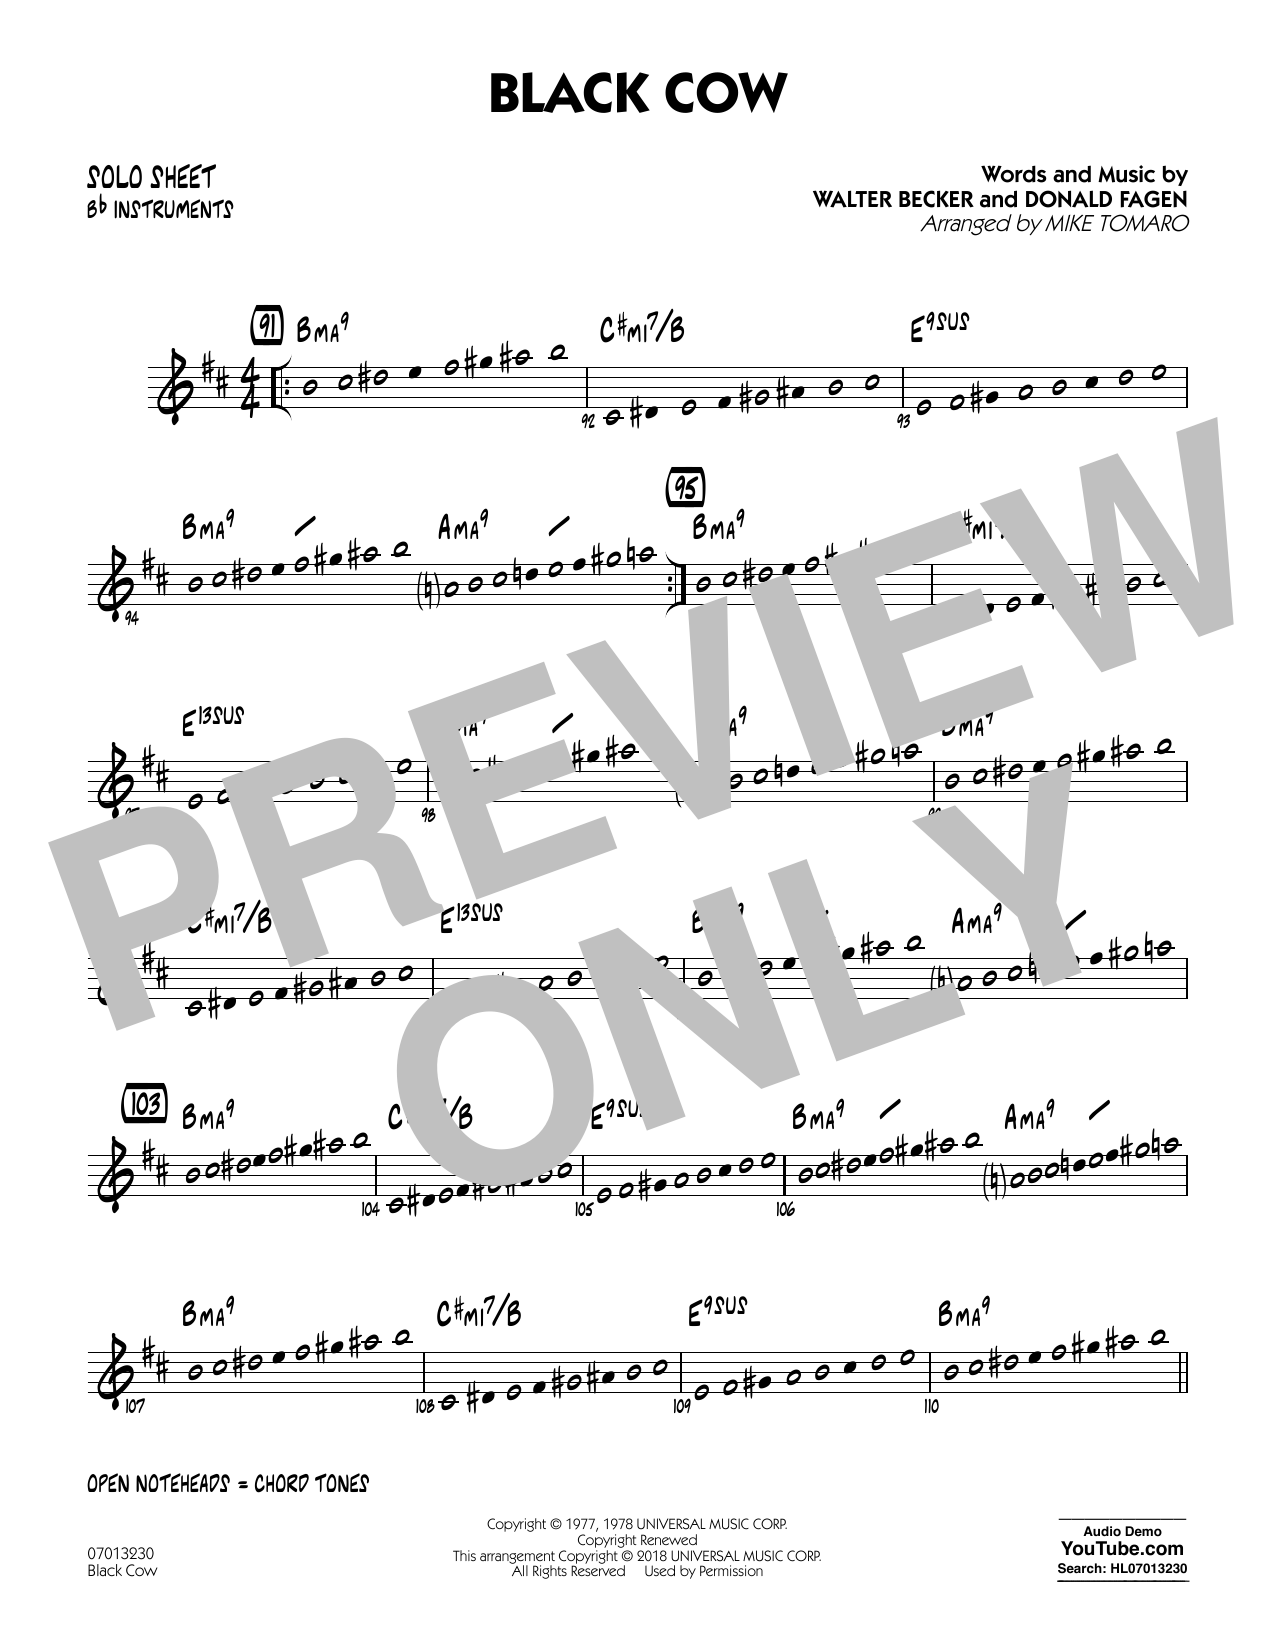 Download Steely Dan Black Cow (arr. Mike Tomaro) - Bb Solo Sheet Music